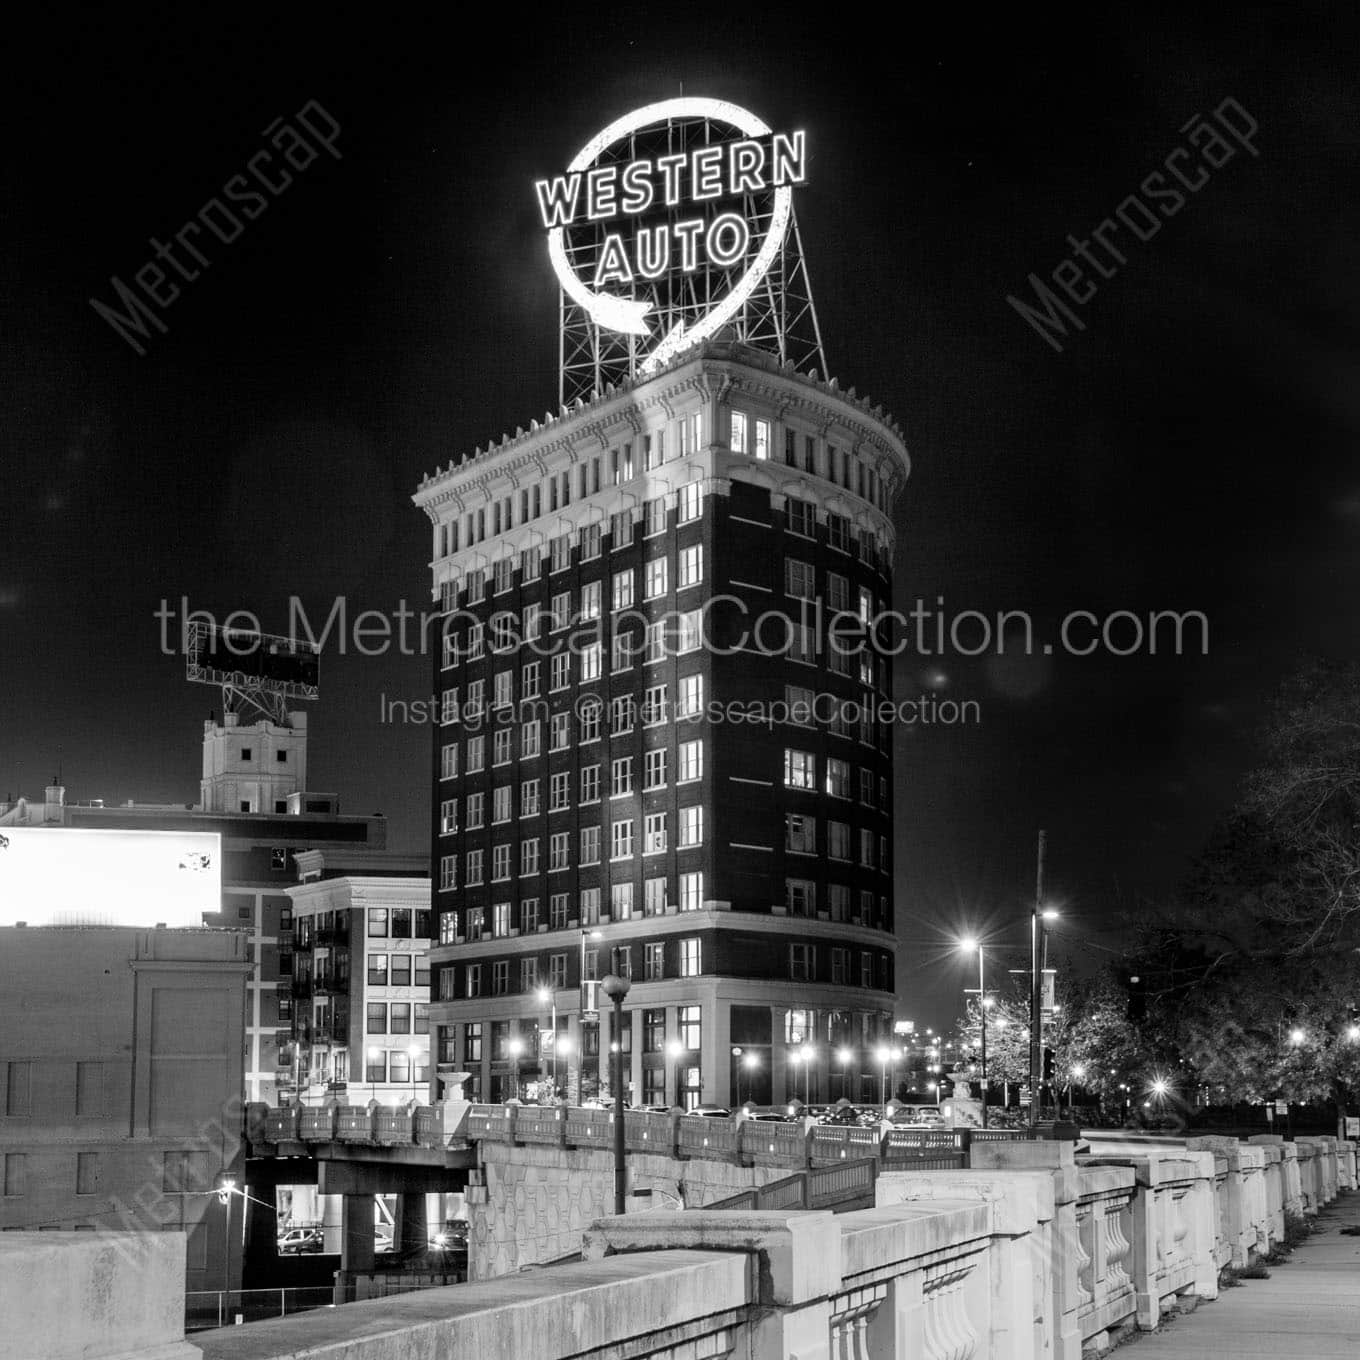 western auto sign building Black & White Office Art